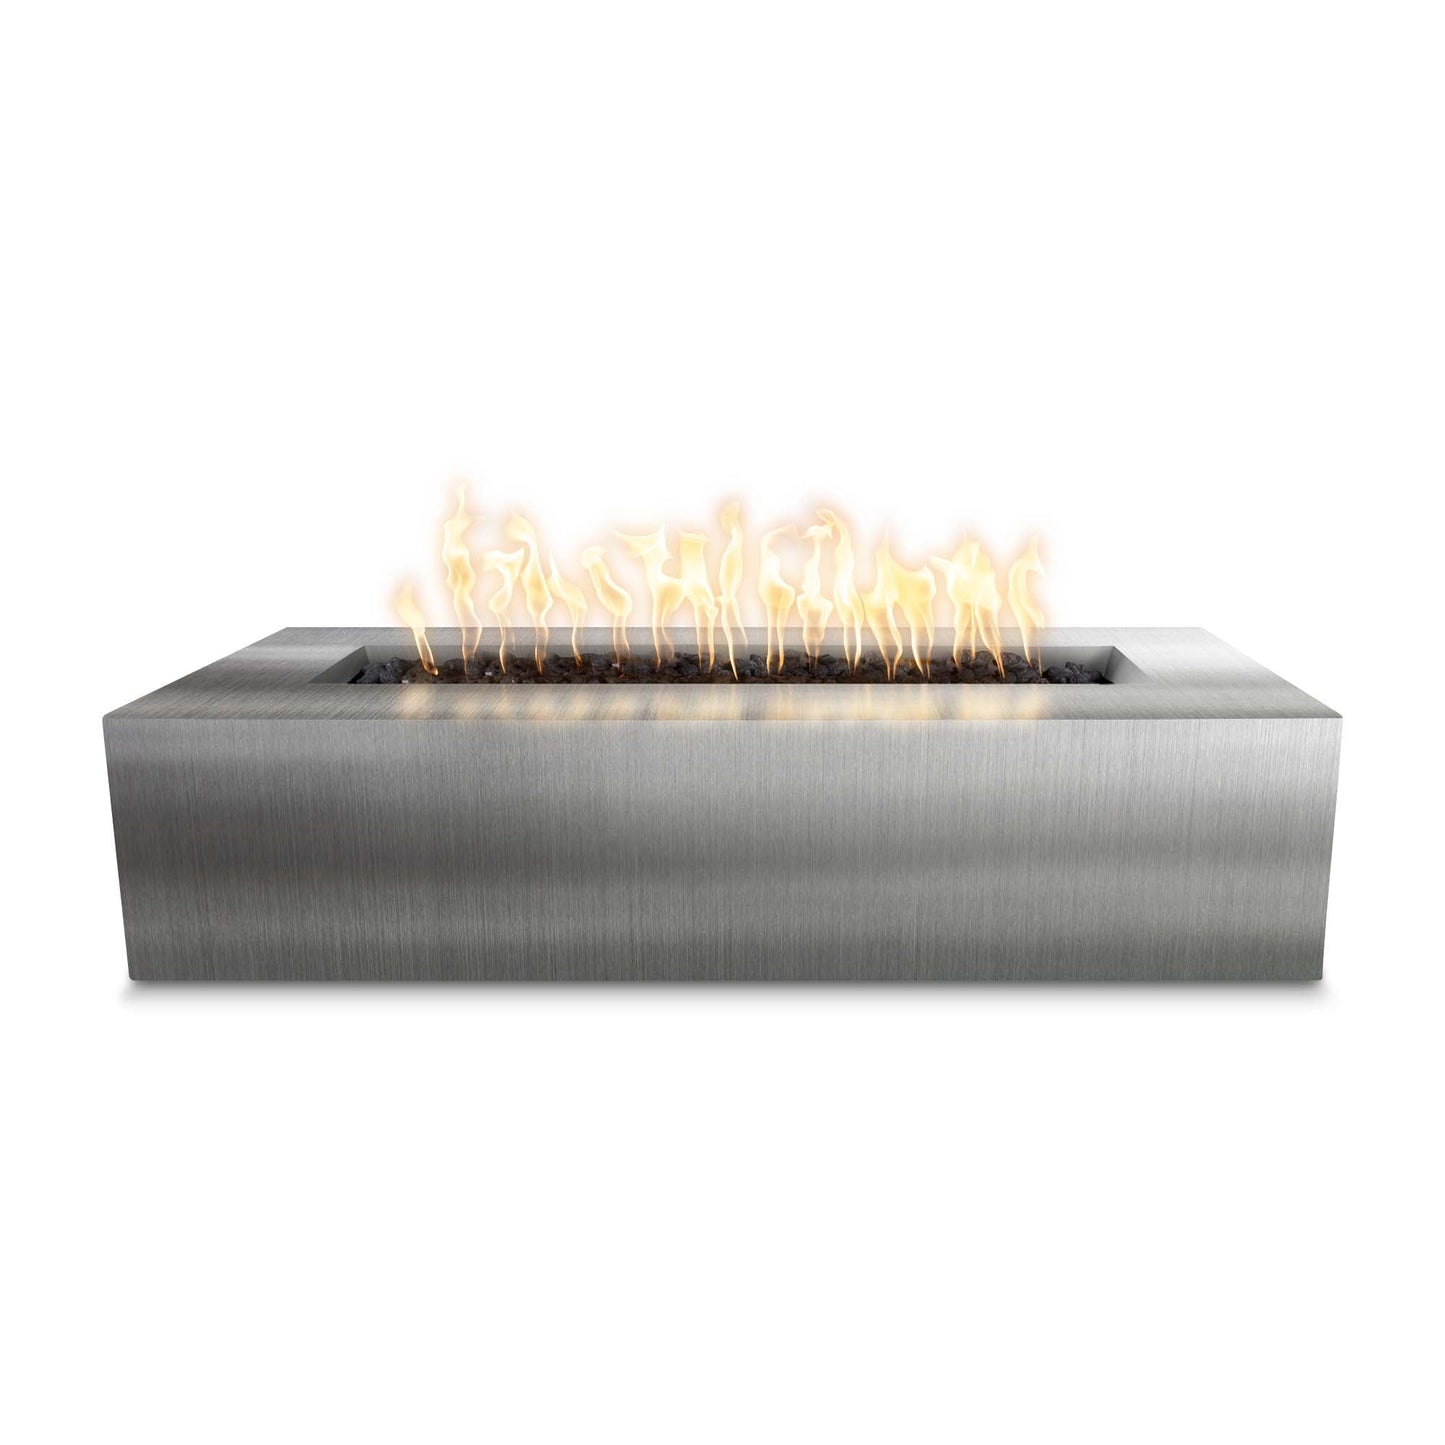 The Outdoor Plus Rectangular Regal 48" Stainless Steel Natural Gas Fire Pit with Match Lit with Flame Sense Ignition